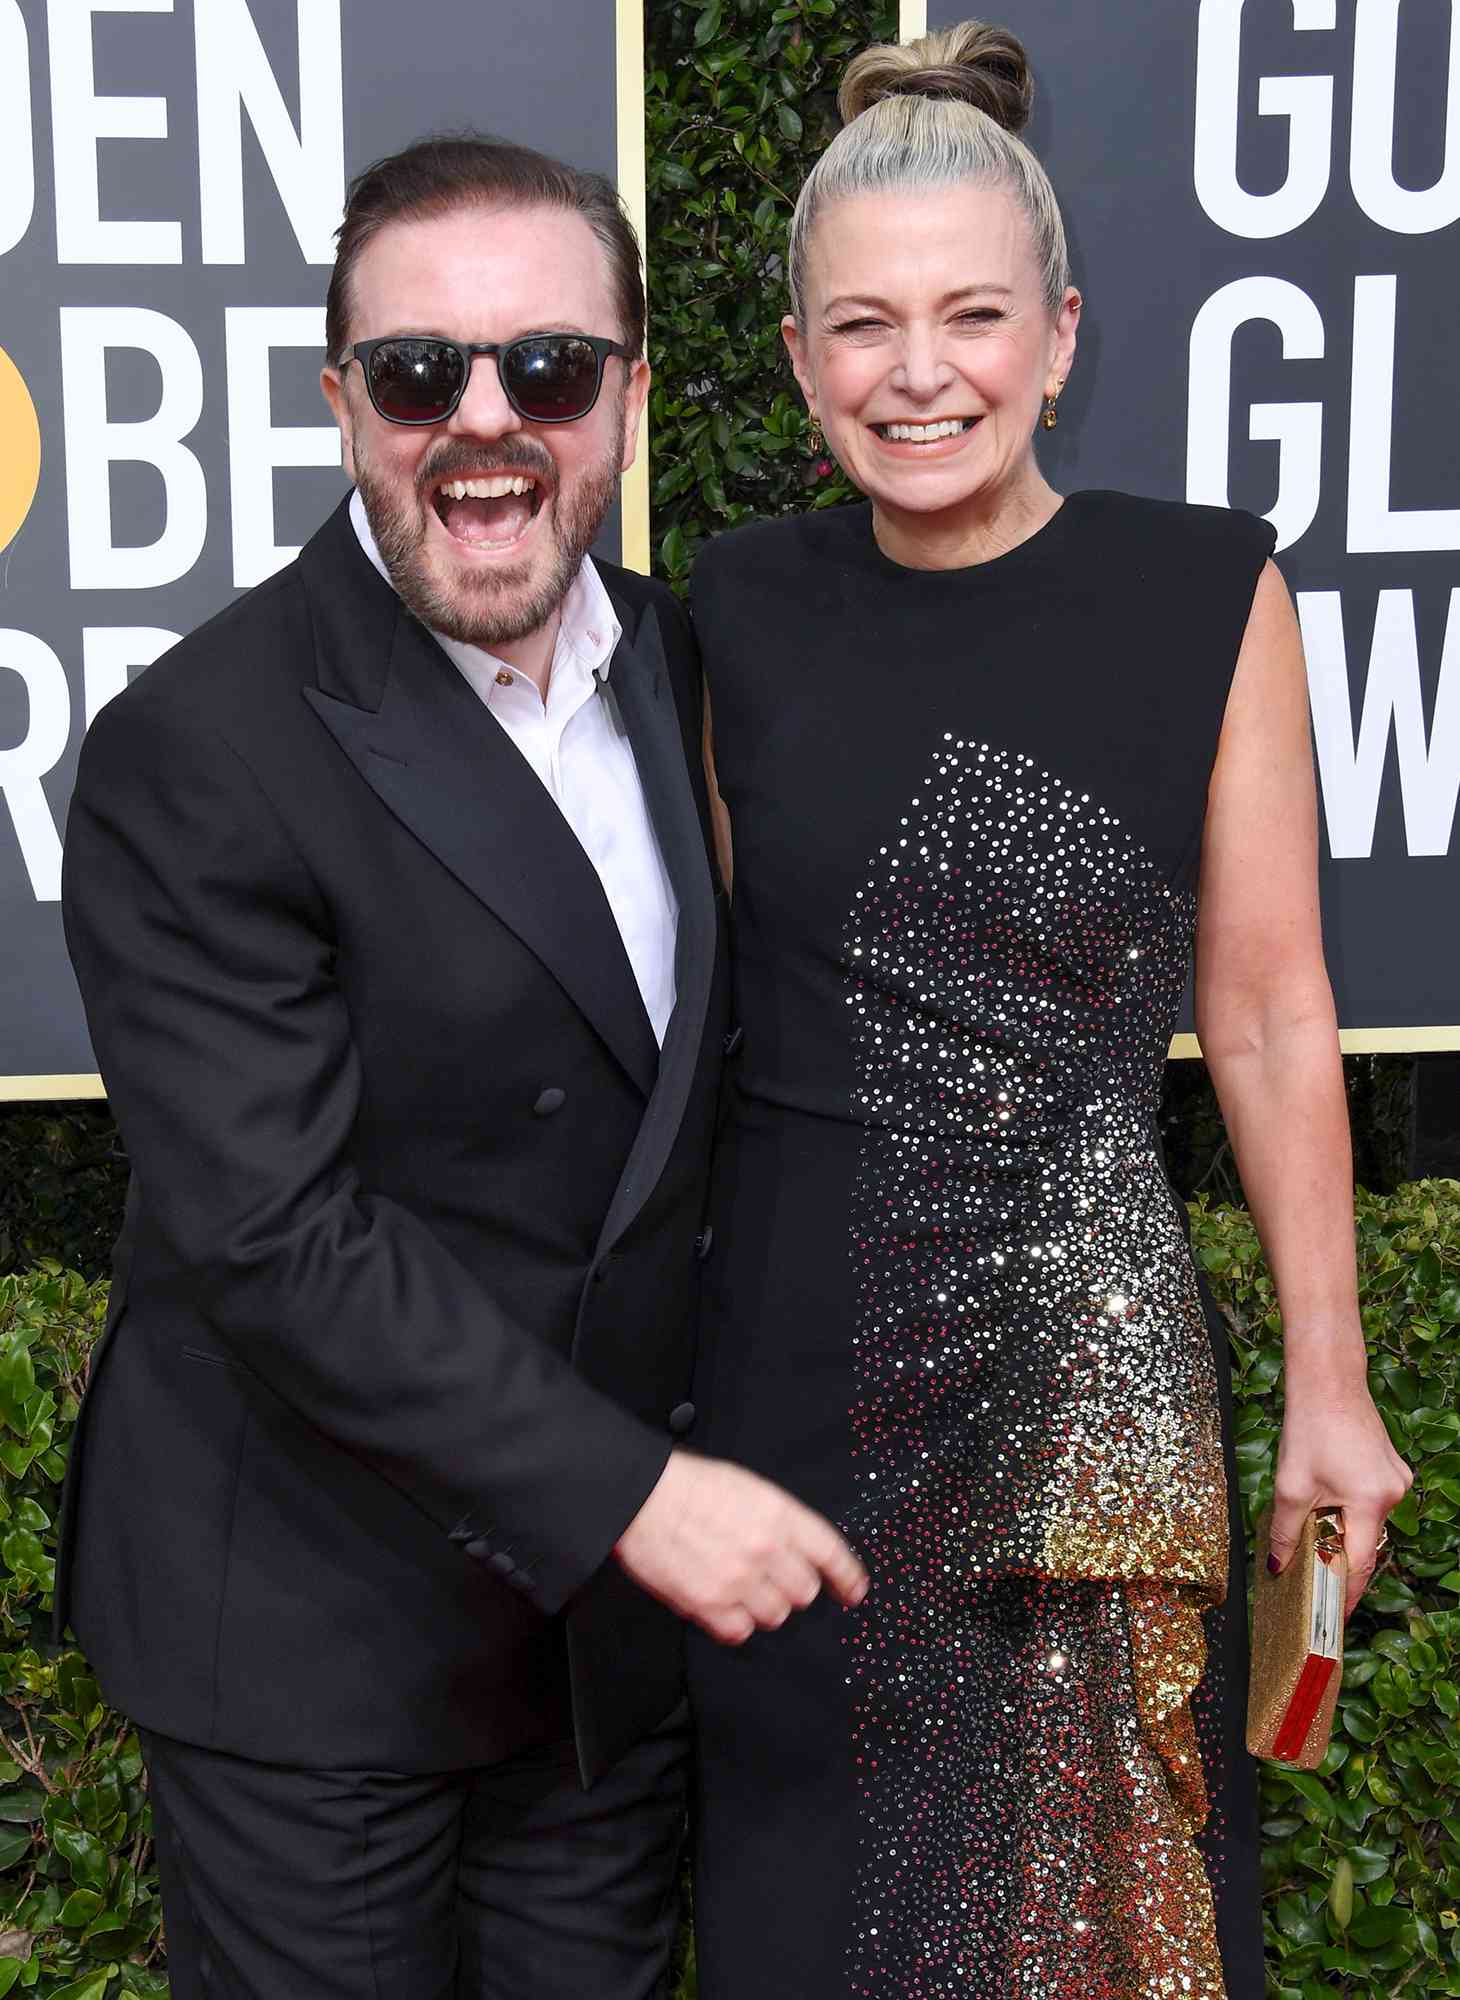 Golden Globes 2020: Ricky Gervais' Most Controversial Moments | PEOPLE.com